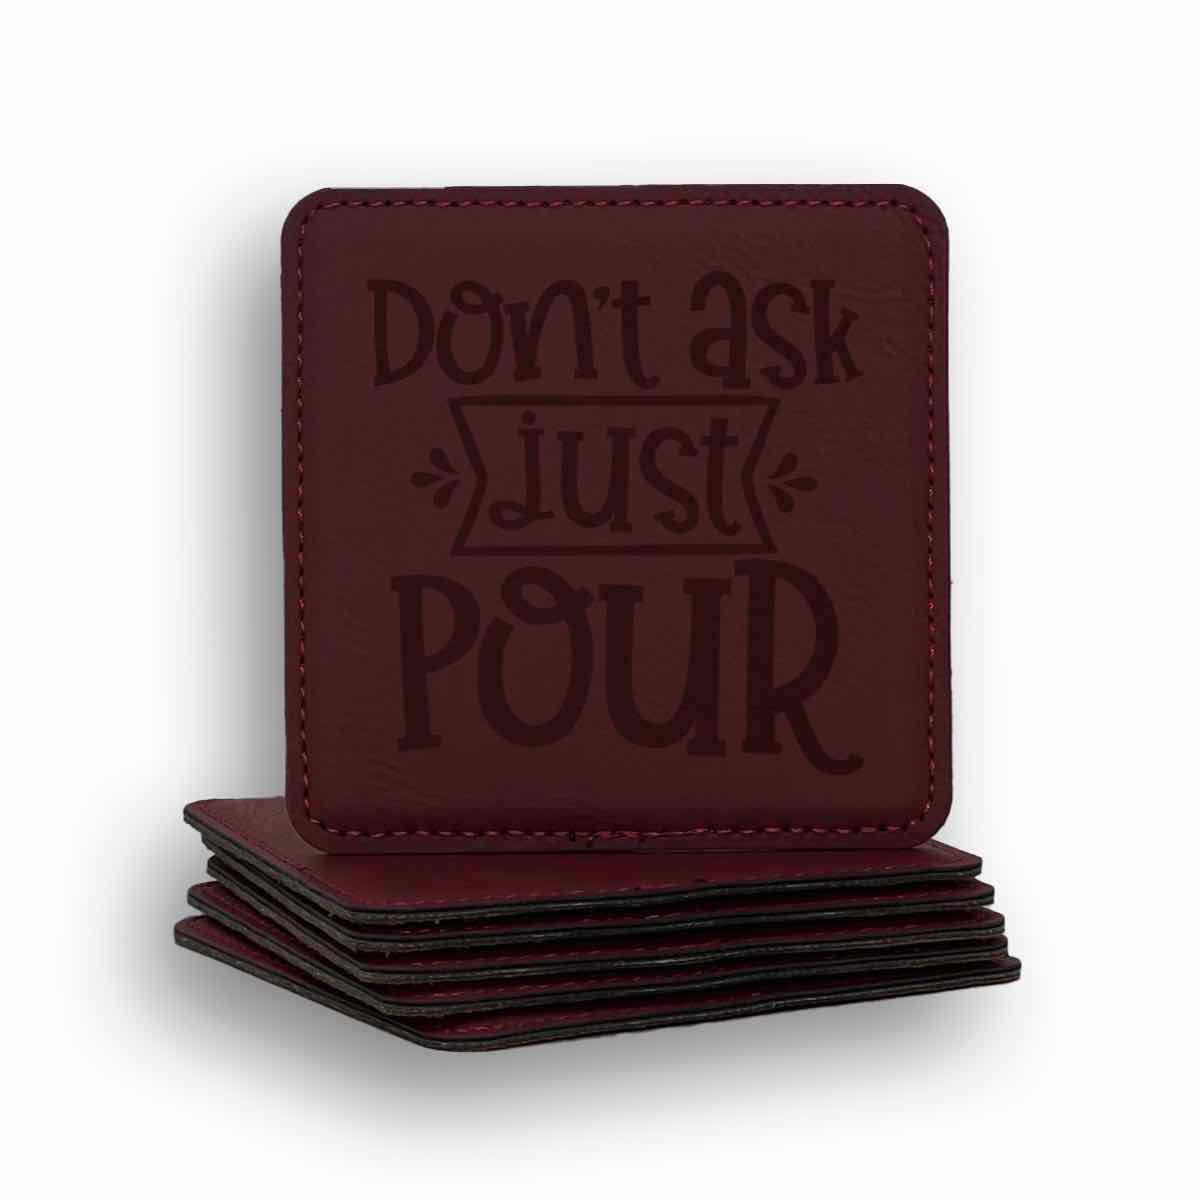 Don't Ask Just Pour Coaster